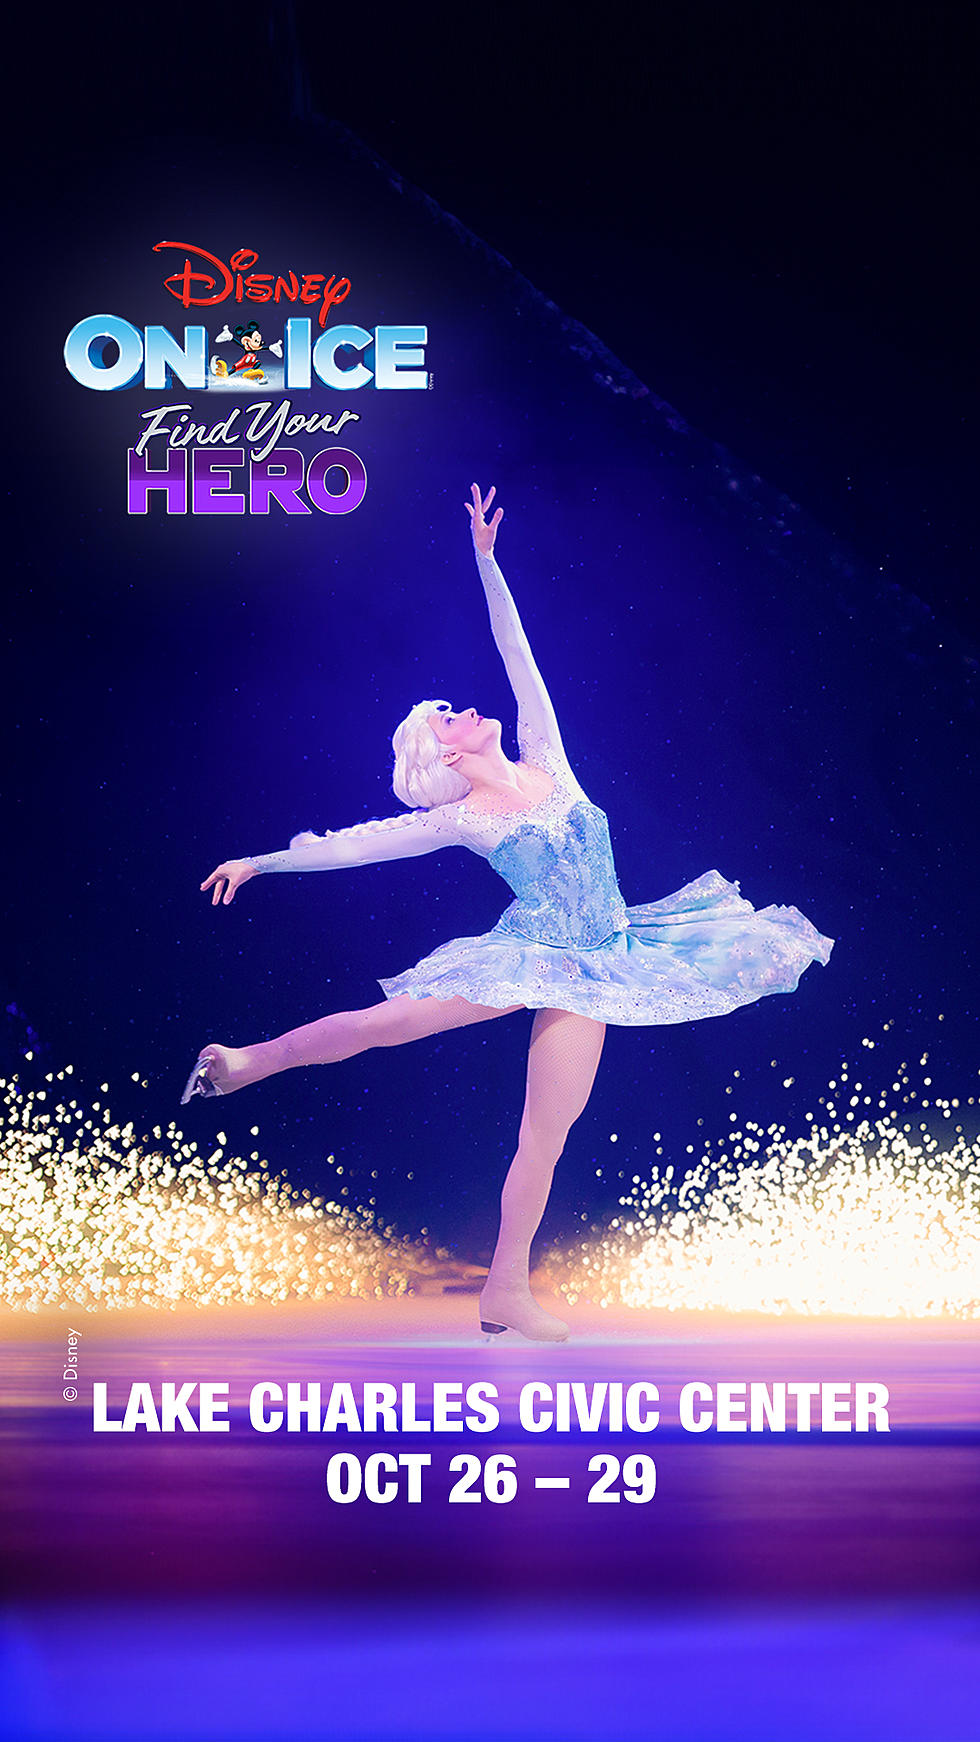 Disney On Ice Presents ‘Find Your Hero’ Live In Lake Charles